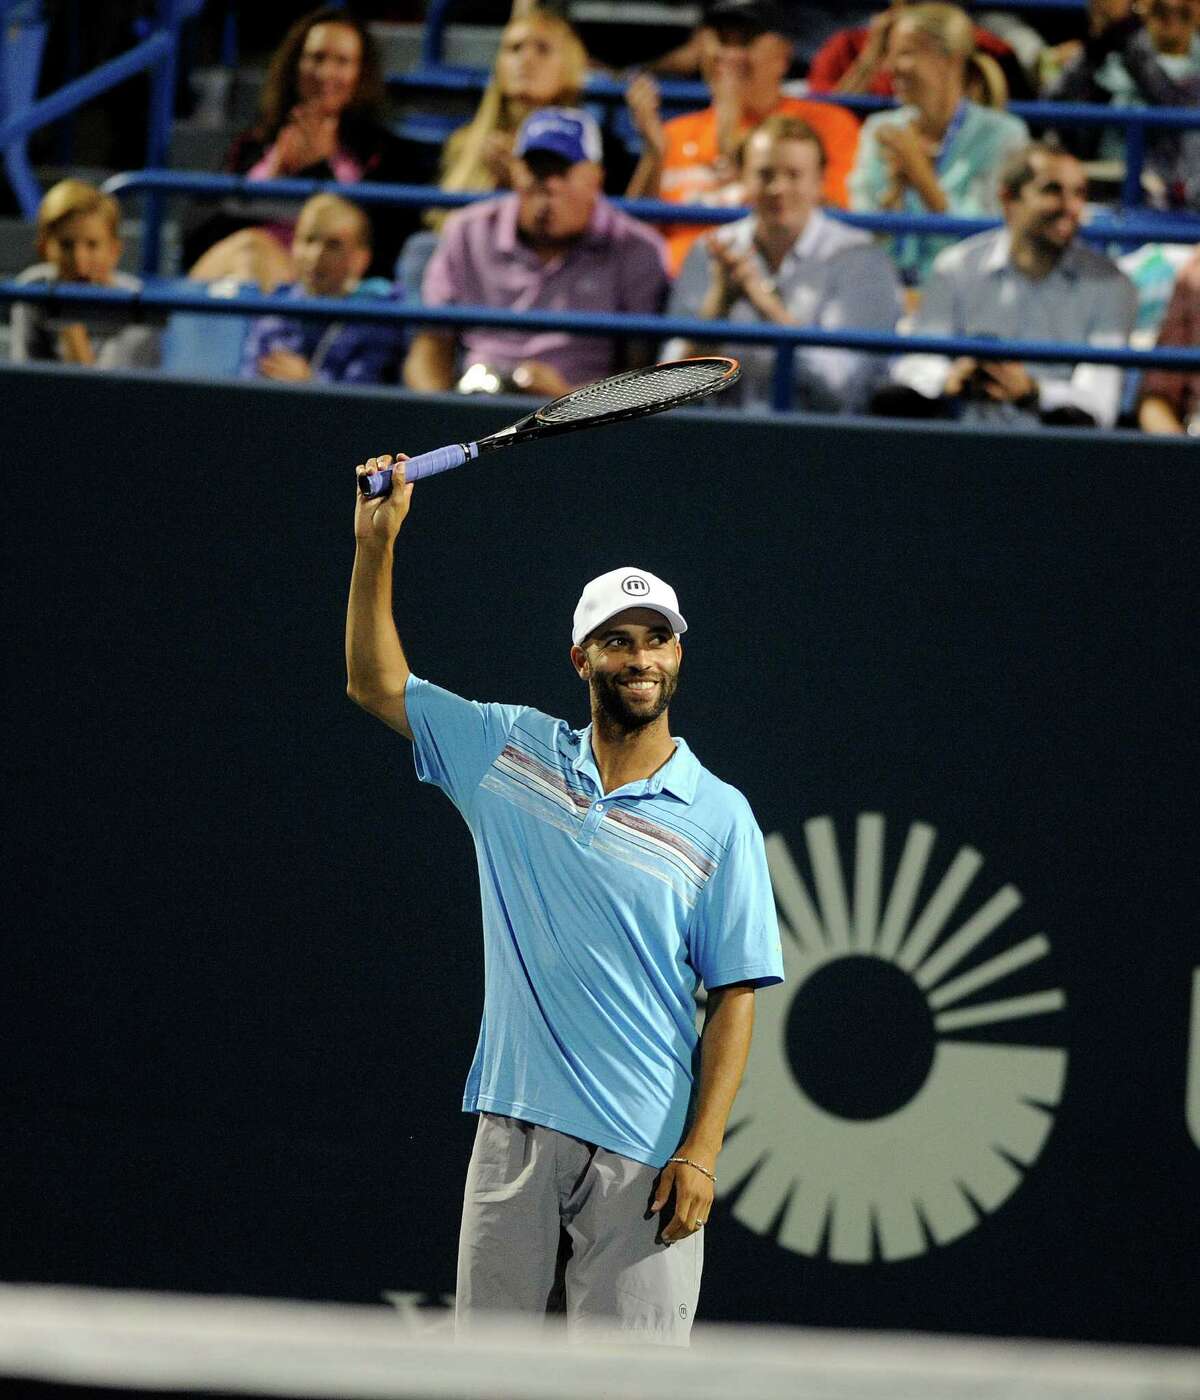 In this Thursday, Aug. 27, 2015, photo, James Blake gestures during an exhibition match at the Connecticut Open tennis tournament in New Haven, Conn. Former tennis star James Blake said Thursday, Sept. 10, 2015, he wants an apology after a case of mistaken identity led police to handcuff him and take him to the ground, but New York's police commissioner said Blake hasn't returned his calls. (AP Photo/Fred Beckham)